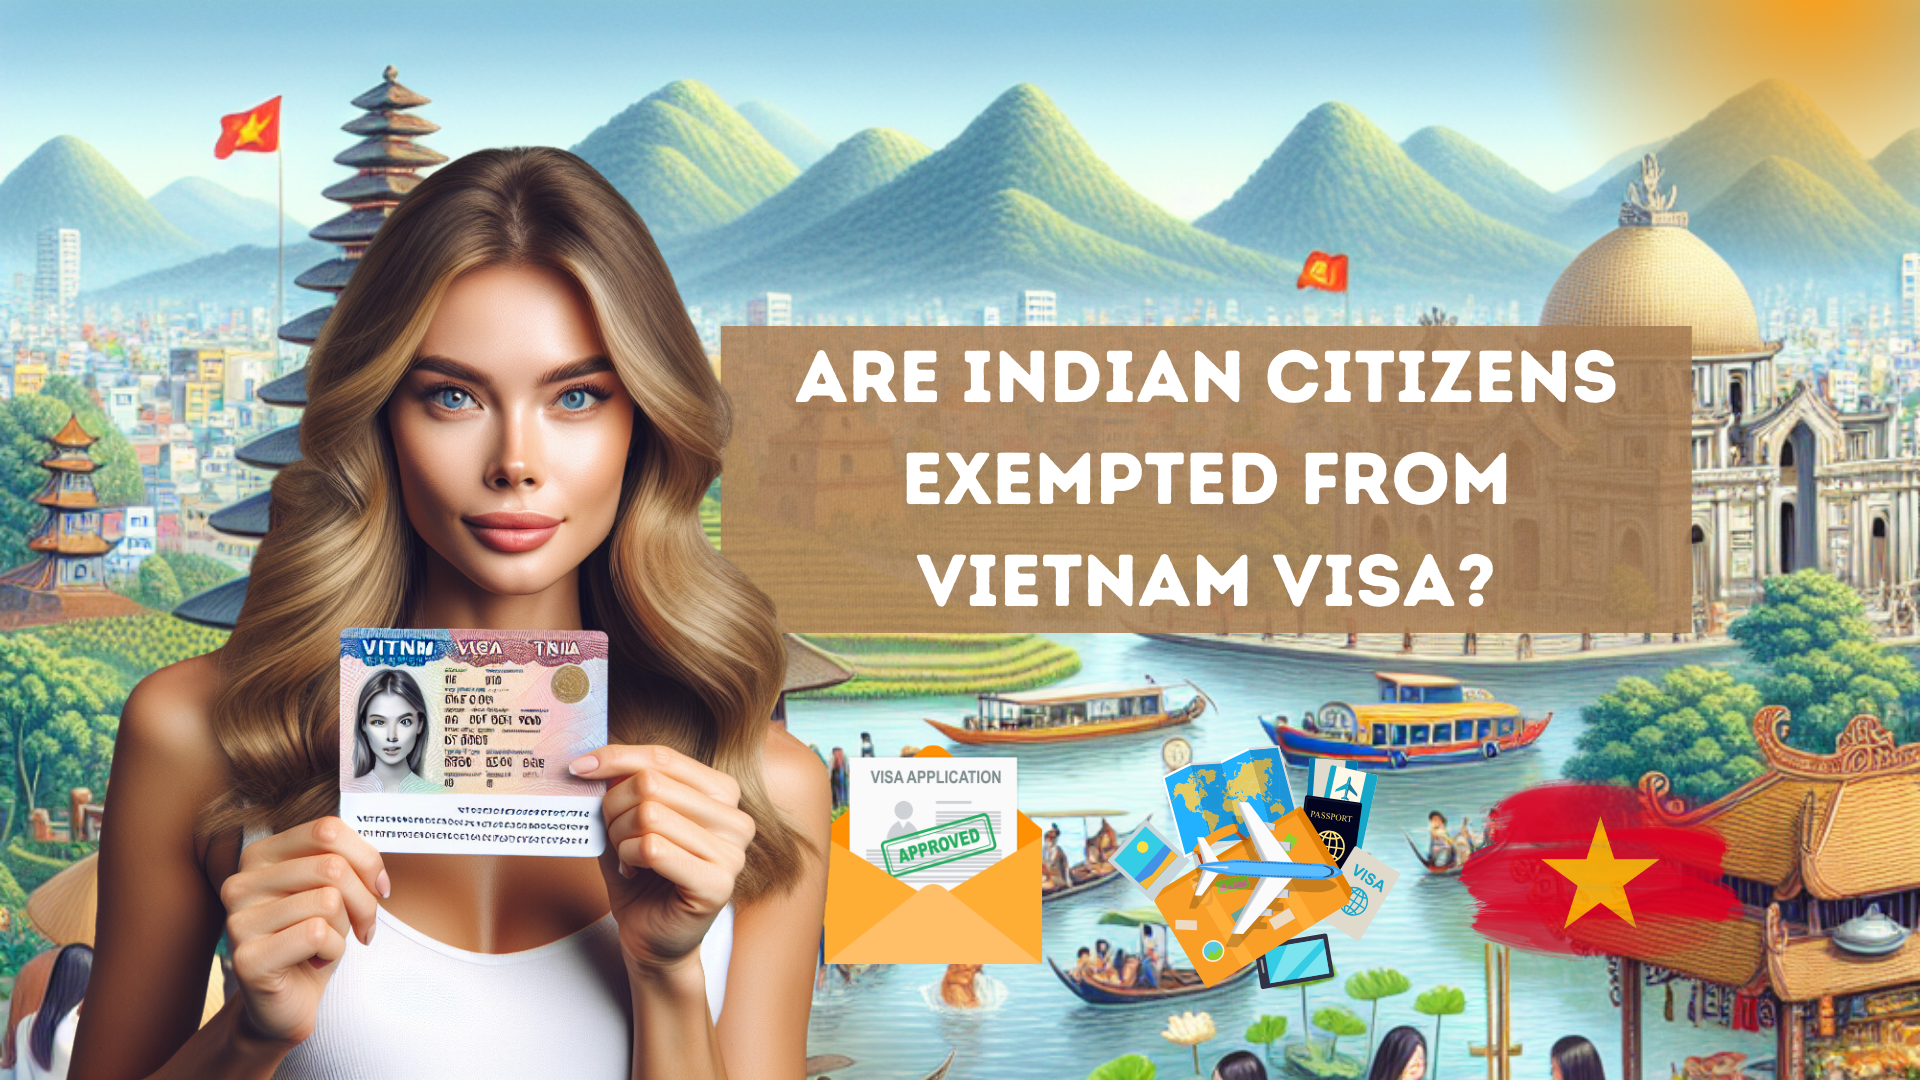 Are Indian Citizens Exempted from Vietnam Visa?